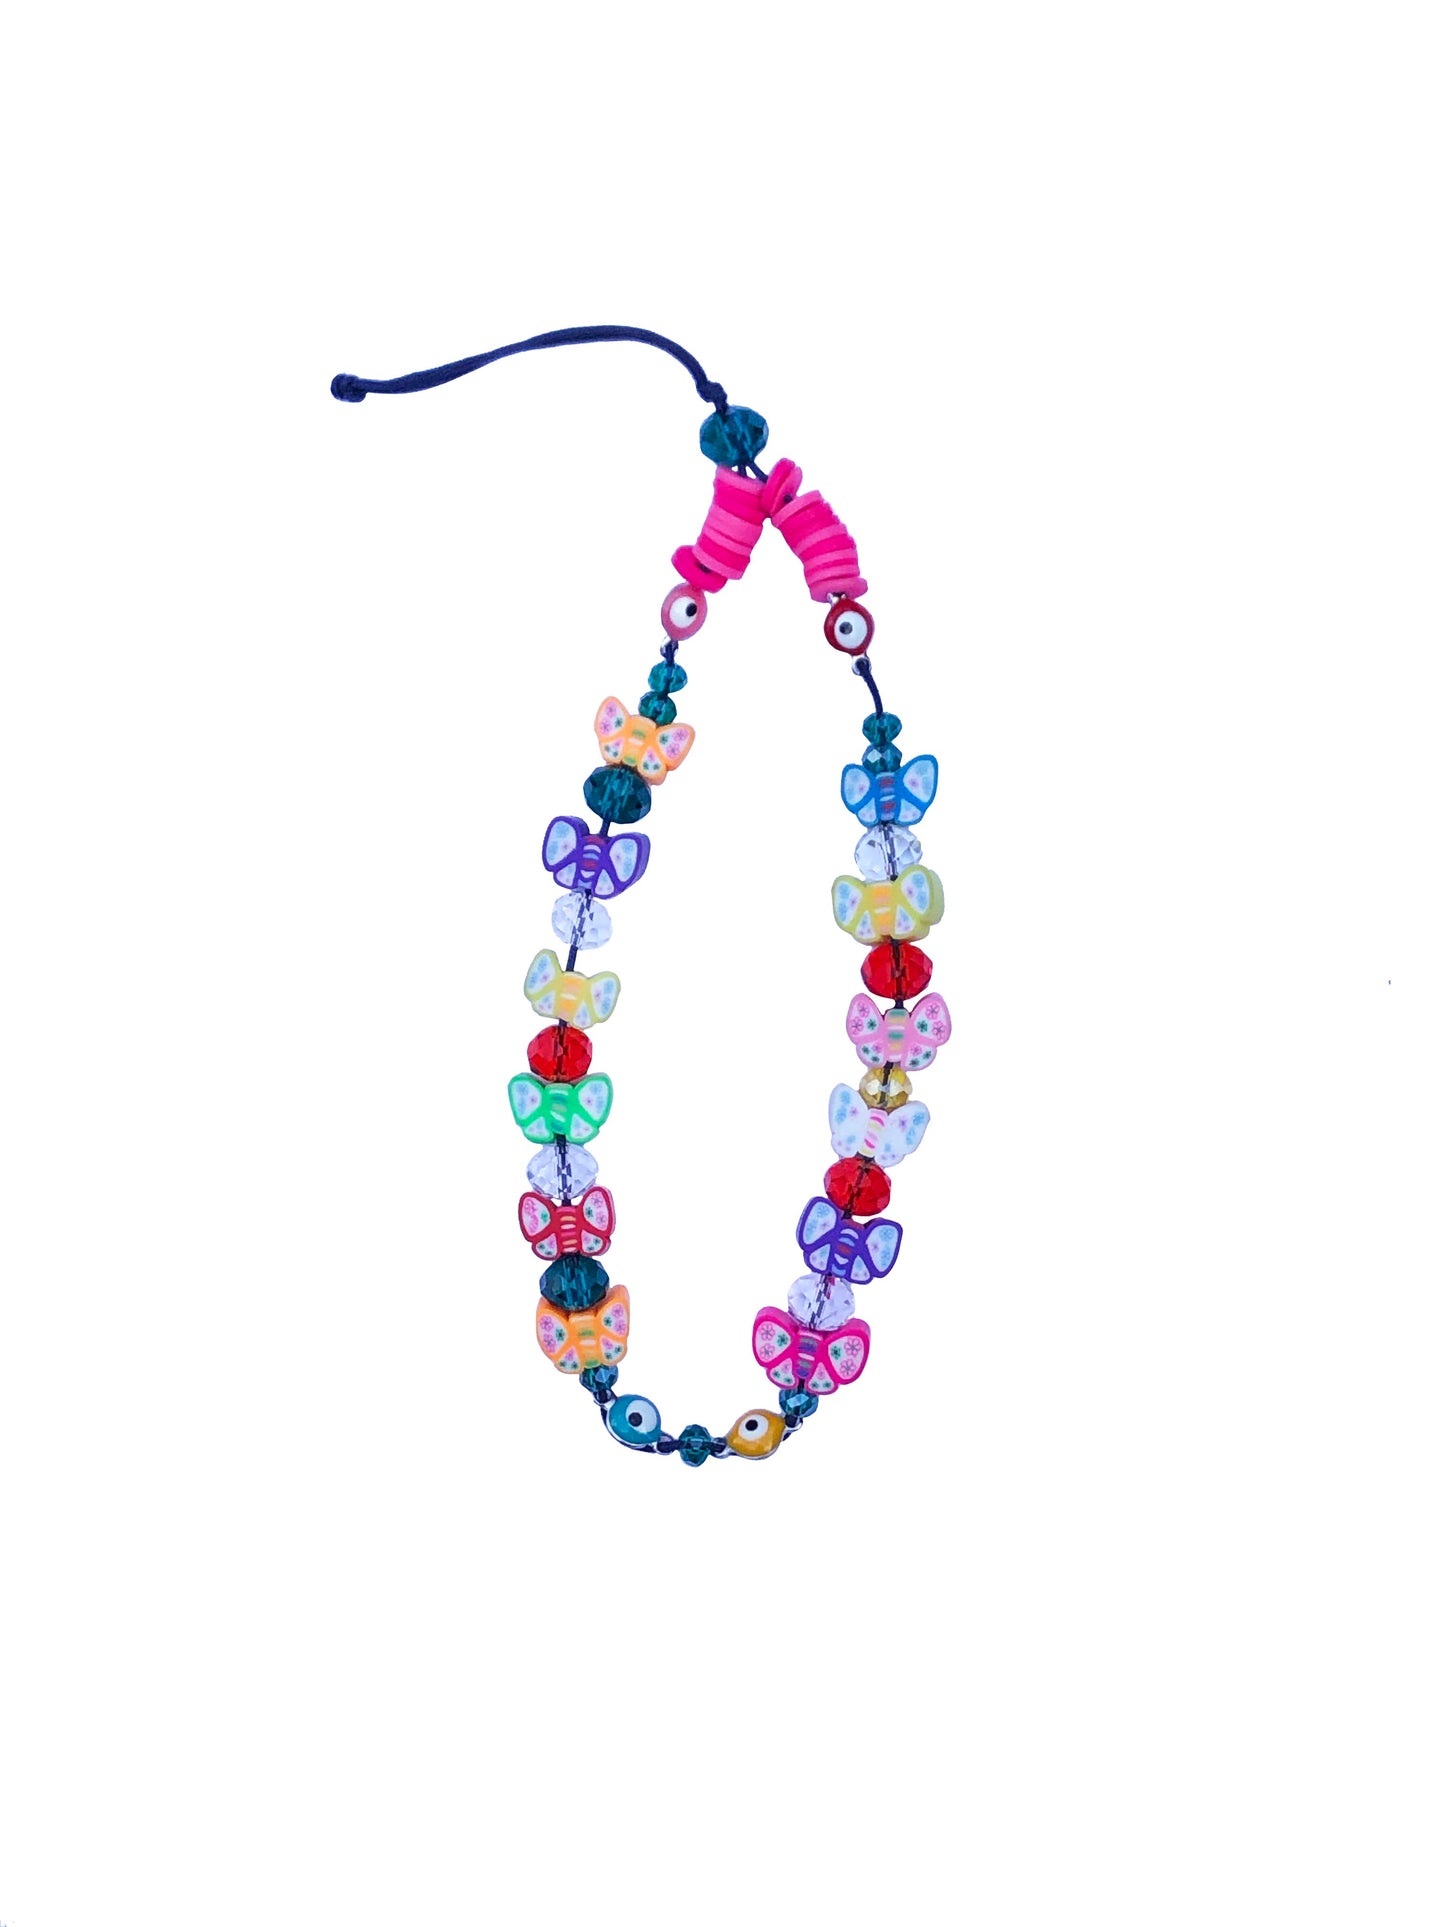 handcrafted multicolored beaded phone wrist strap made using butterfly charms, crystal and flat rubber beads, and four evil eye charms.